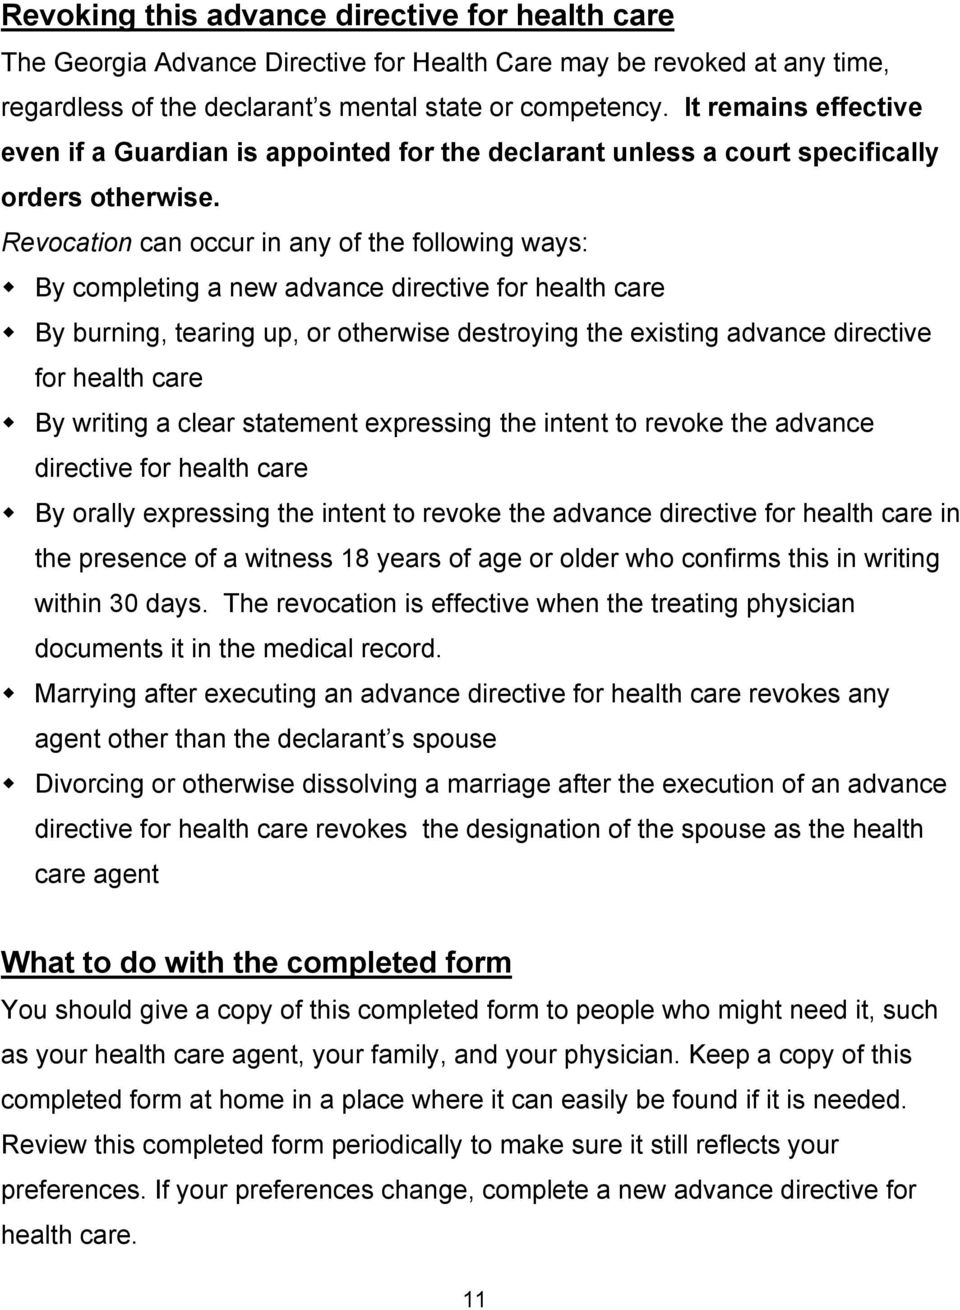 Revocation can occur in any of the following ways: By completing a new advance directive for health care By burning, tearing up, or otherwise destroying the existing advance directive for health care